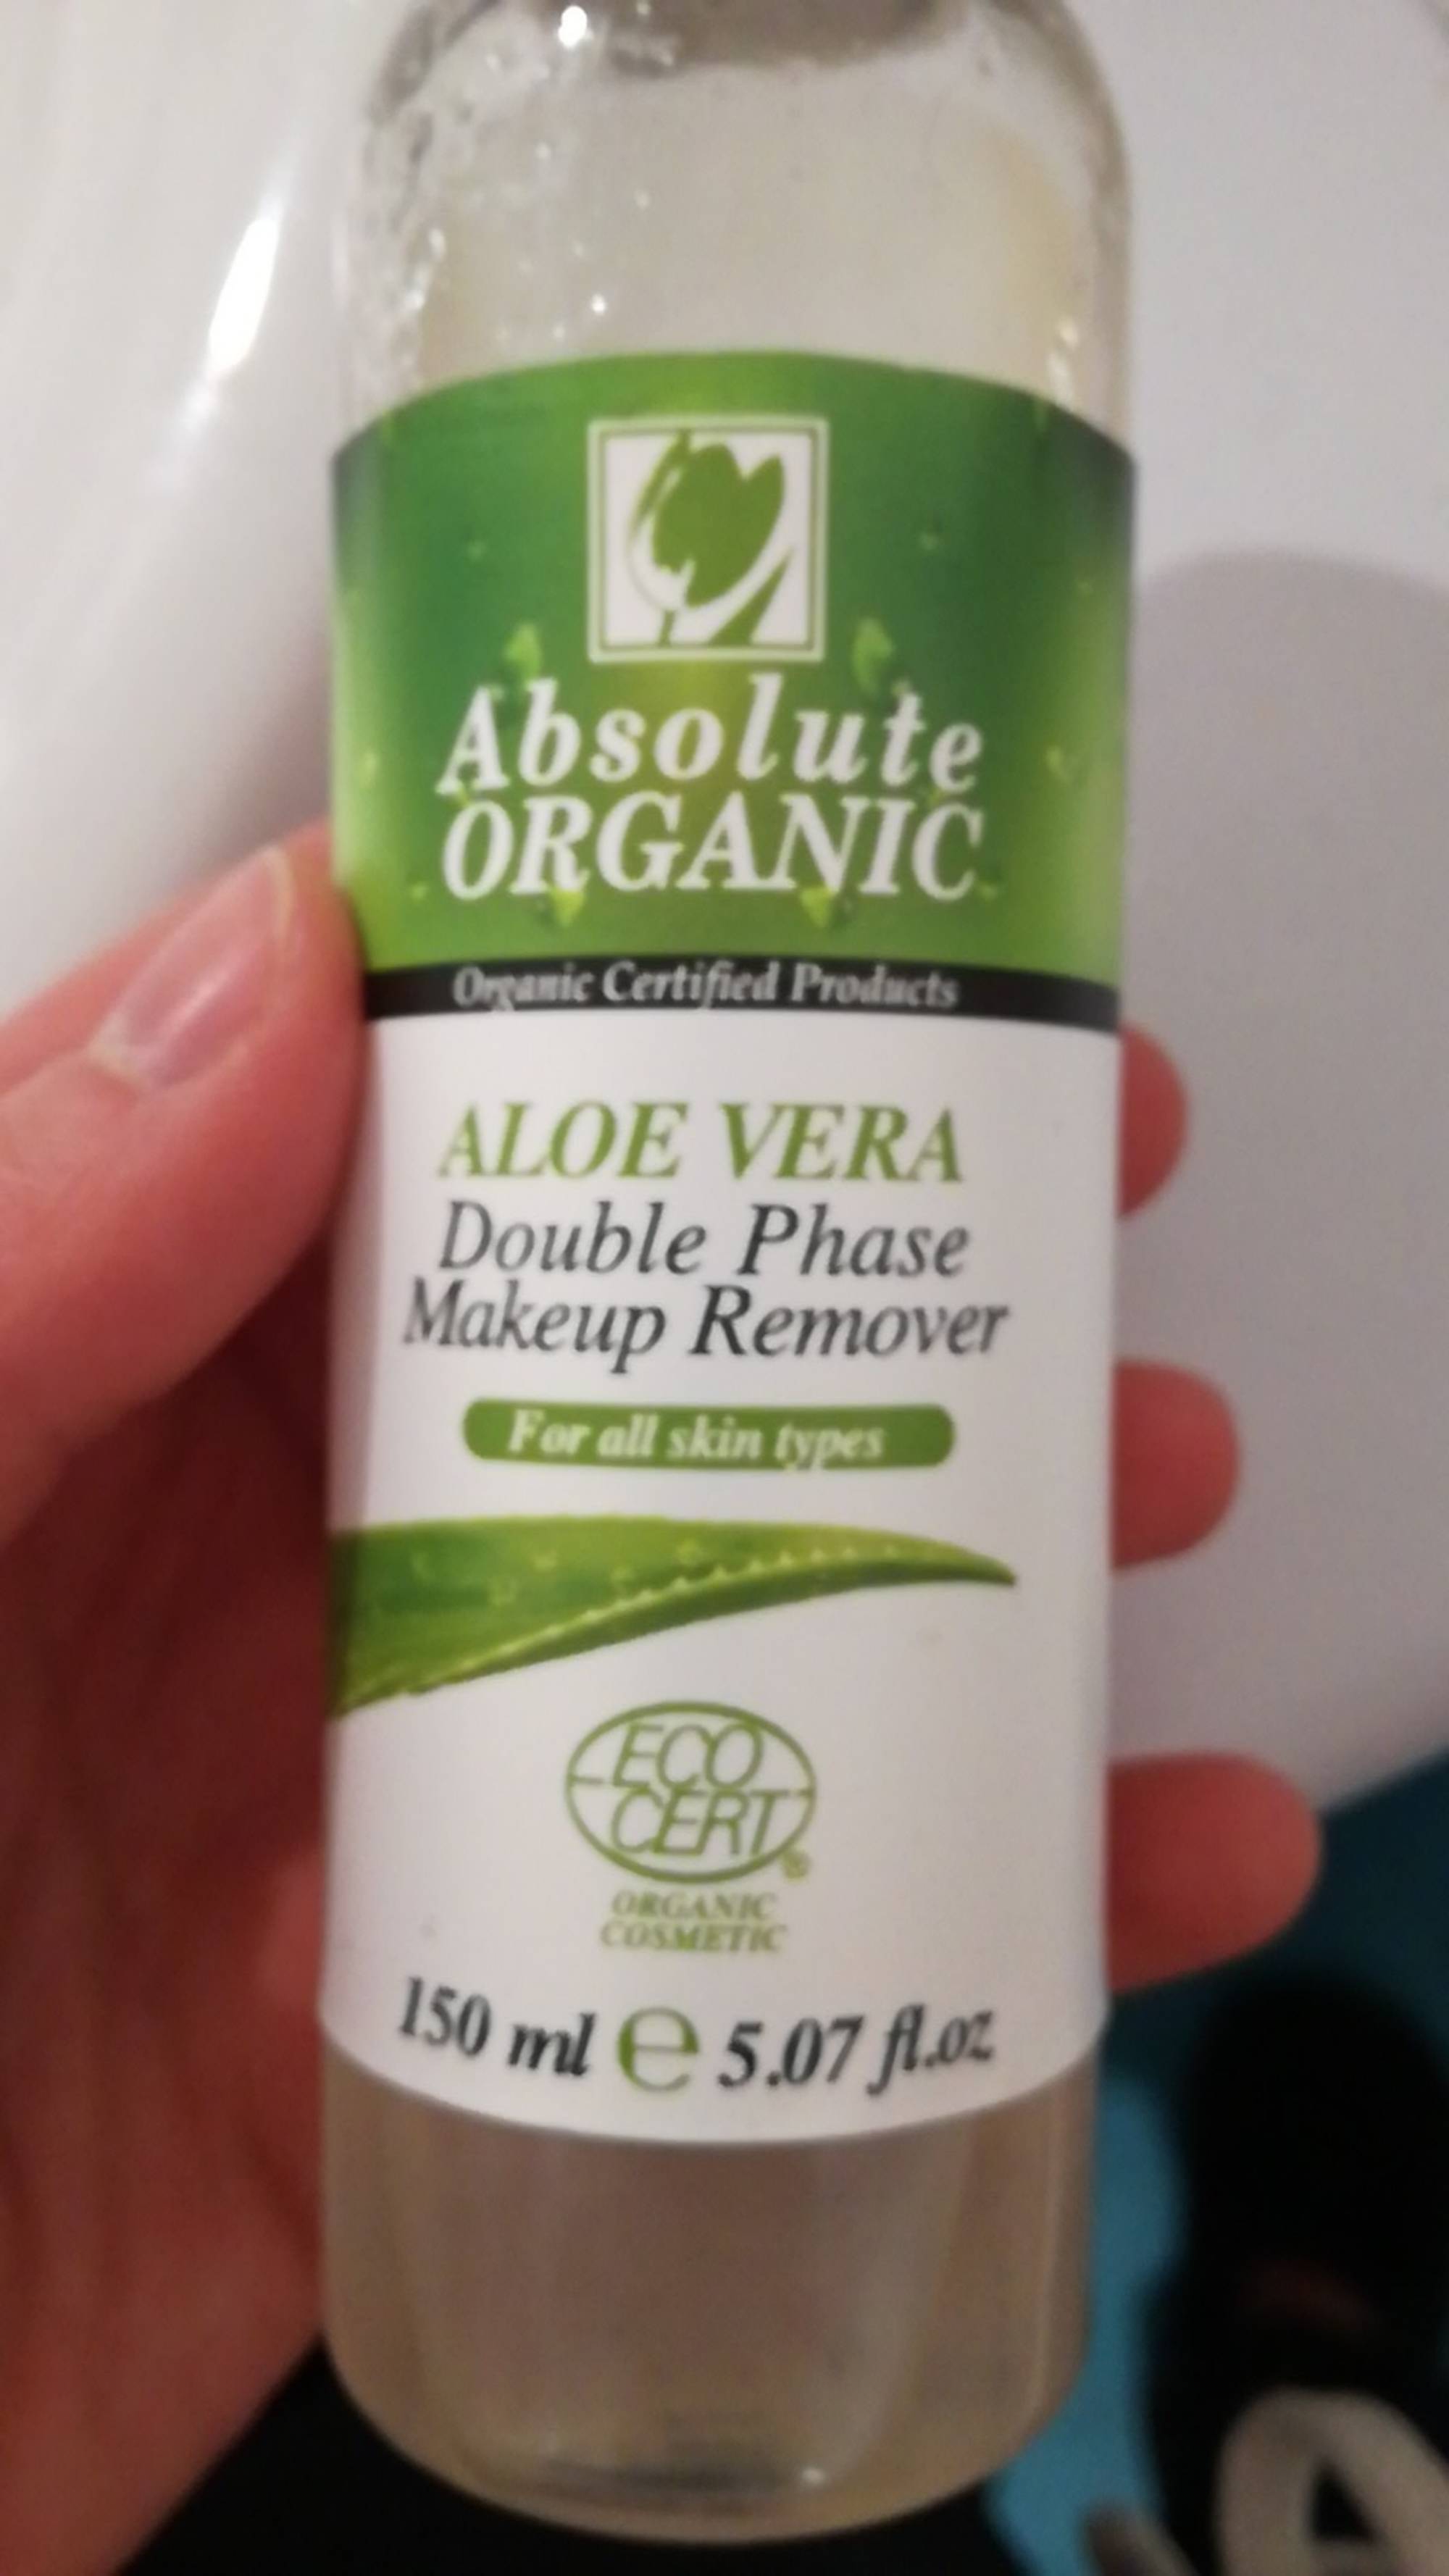 ABSOLUTE ORGANIC - Aloe vera - Double phase makeup remover